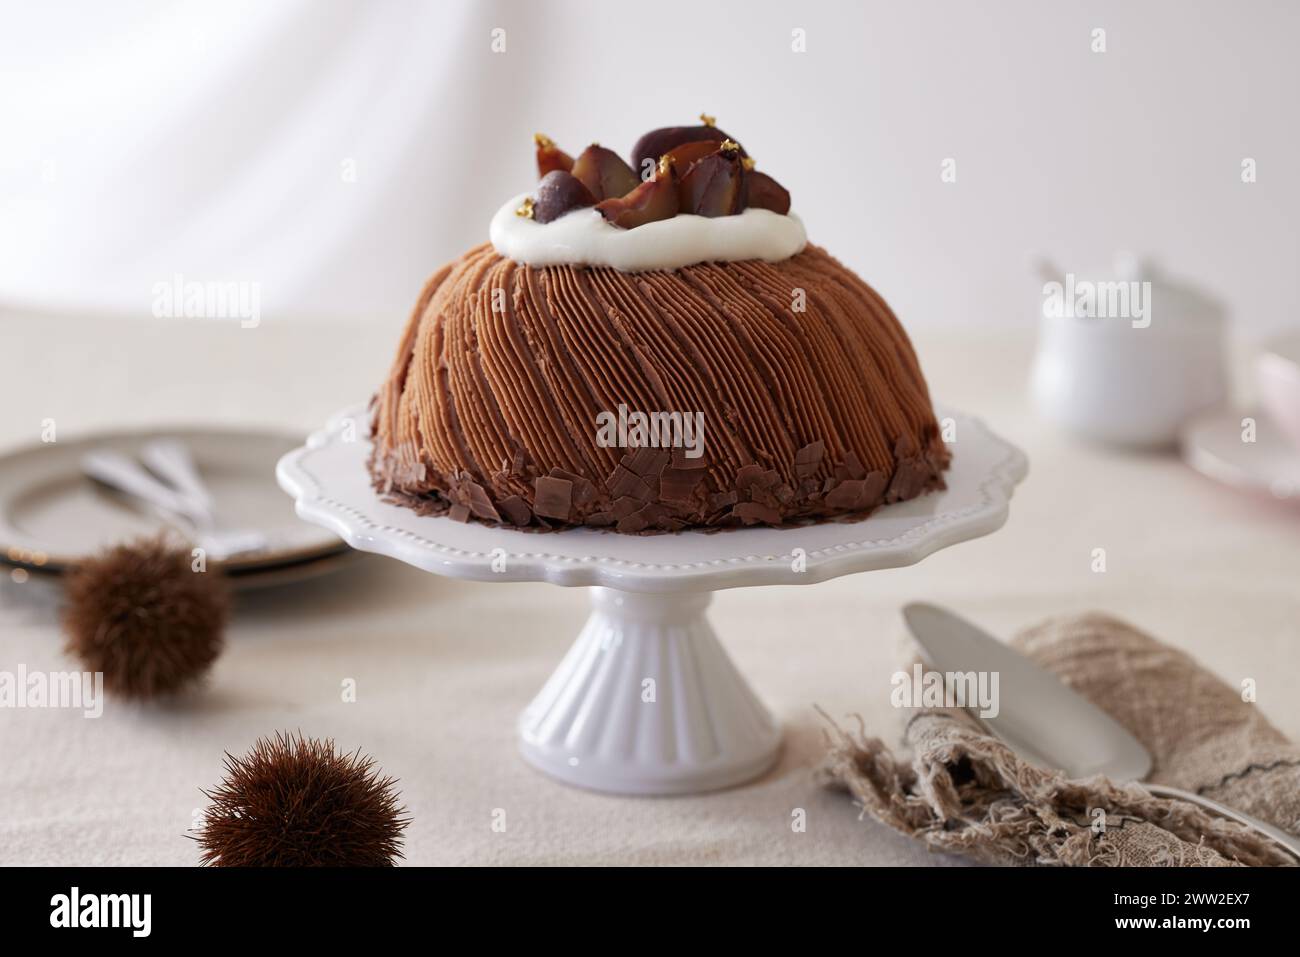 A cake on a white cake stand Stock Photo